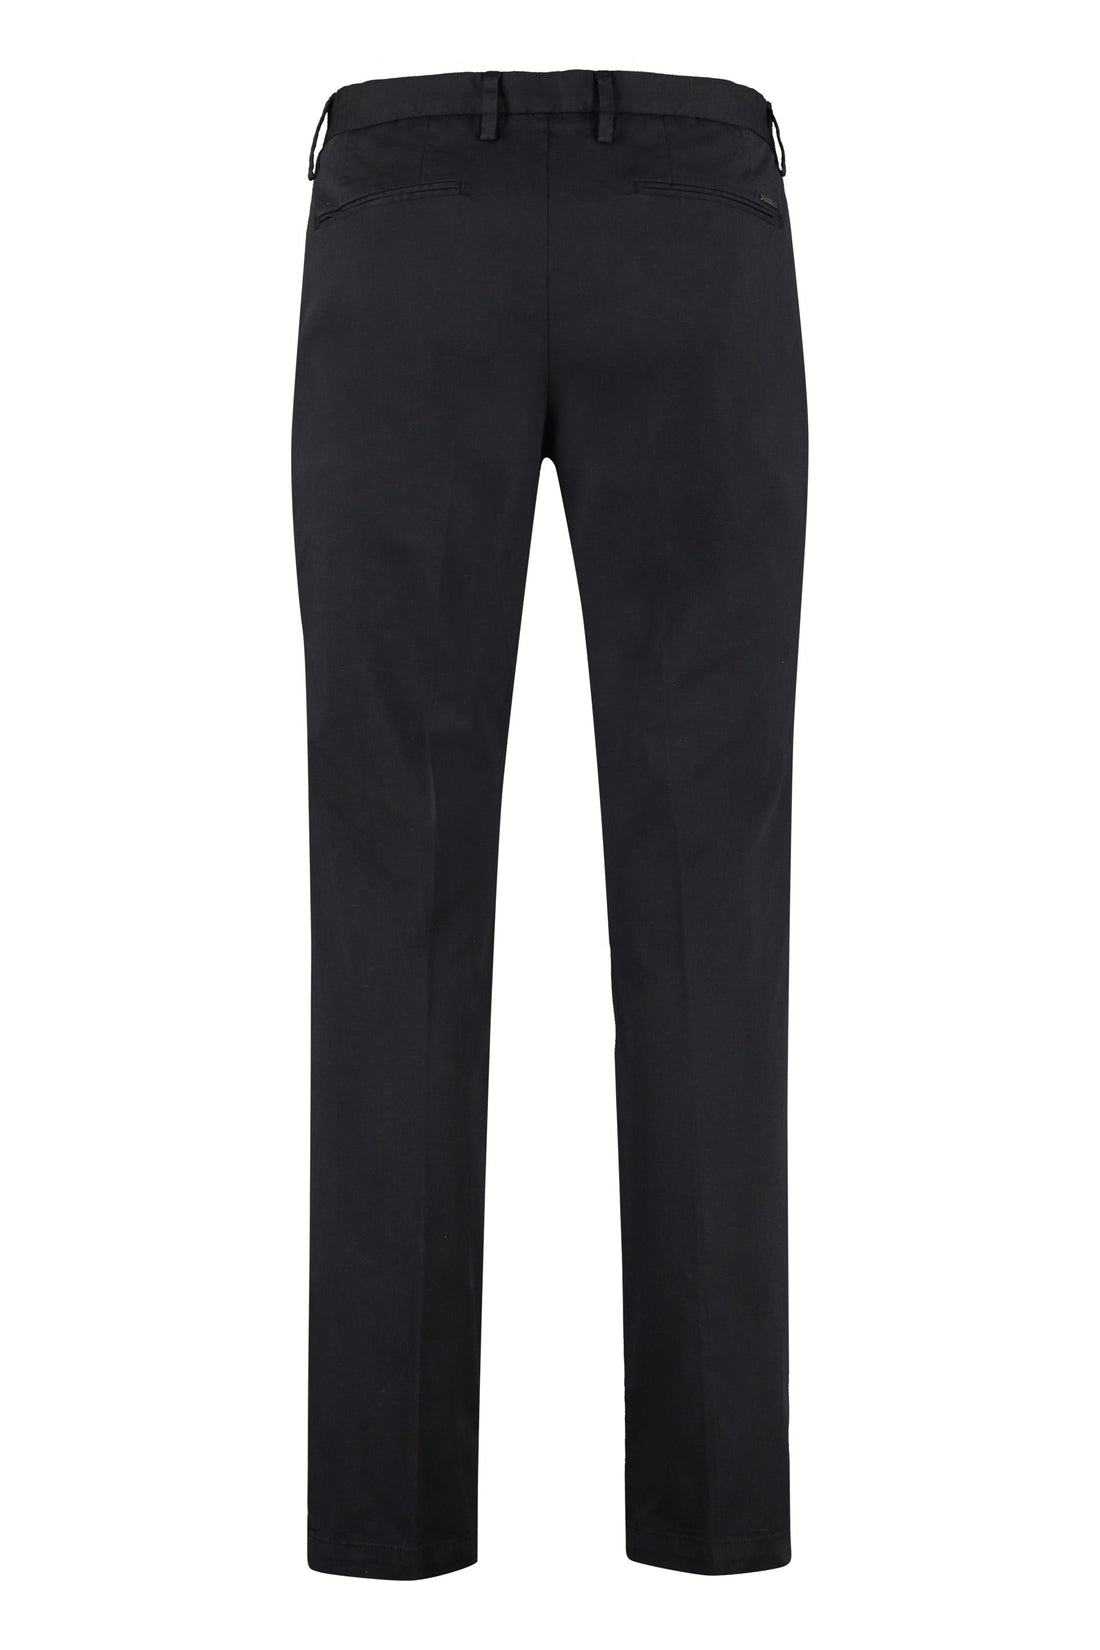 BOSS-OUTLET-SALE-Stretch cotton chino trousers-ARCHIVIST